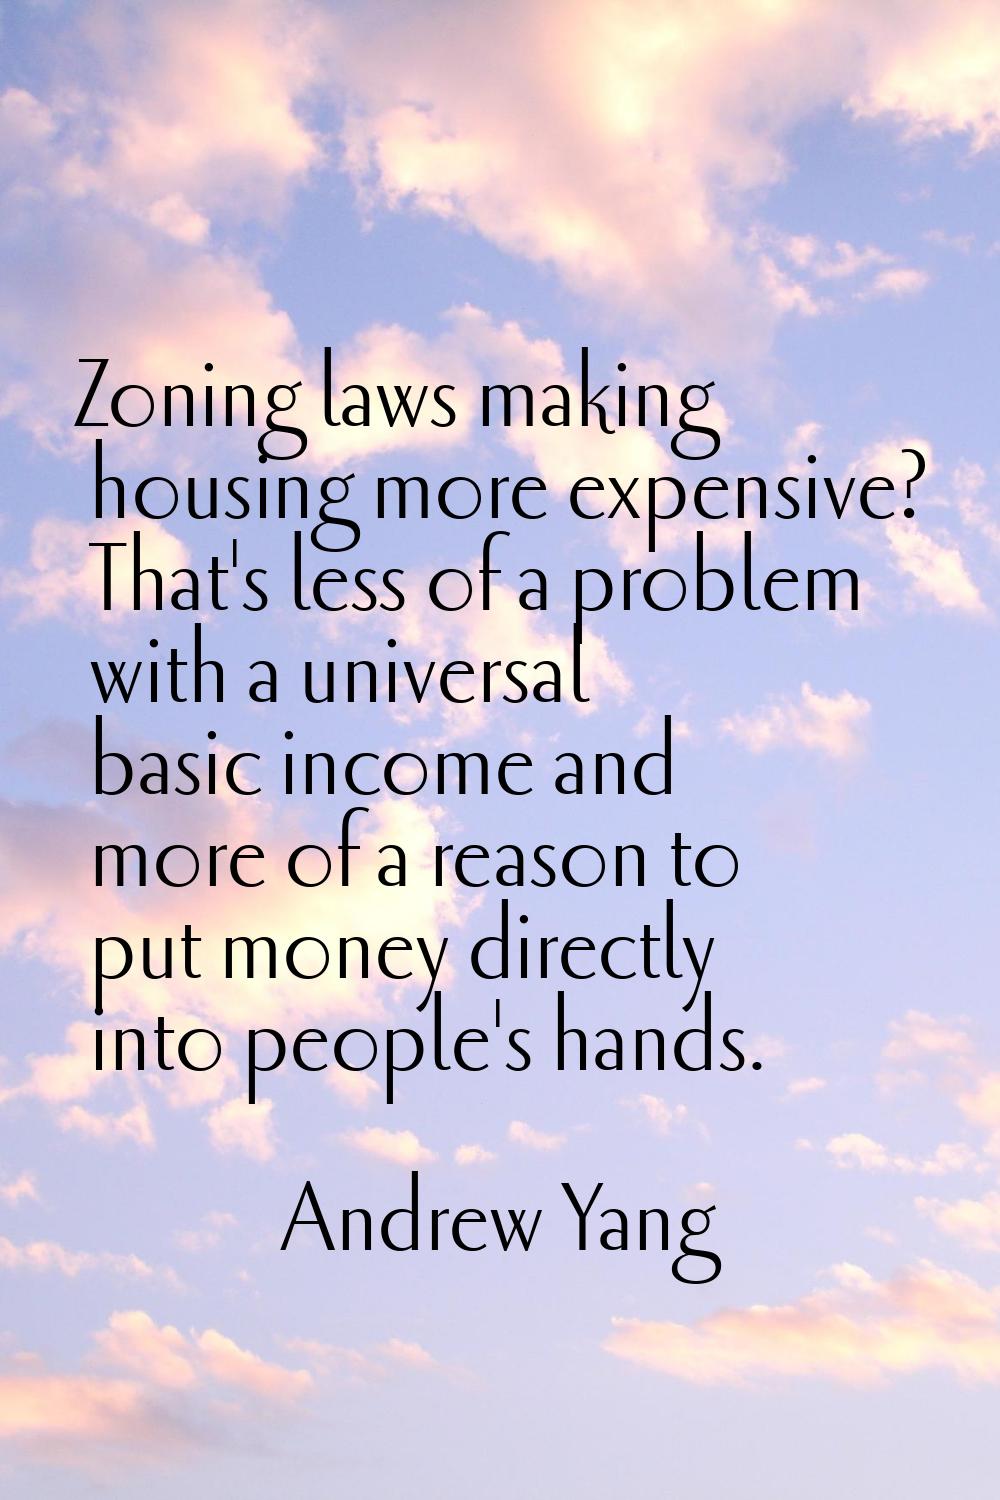 Zoning laws making housing more expensive? That's less of a problem with a universal basic income a